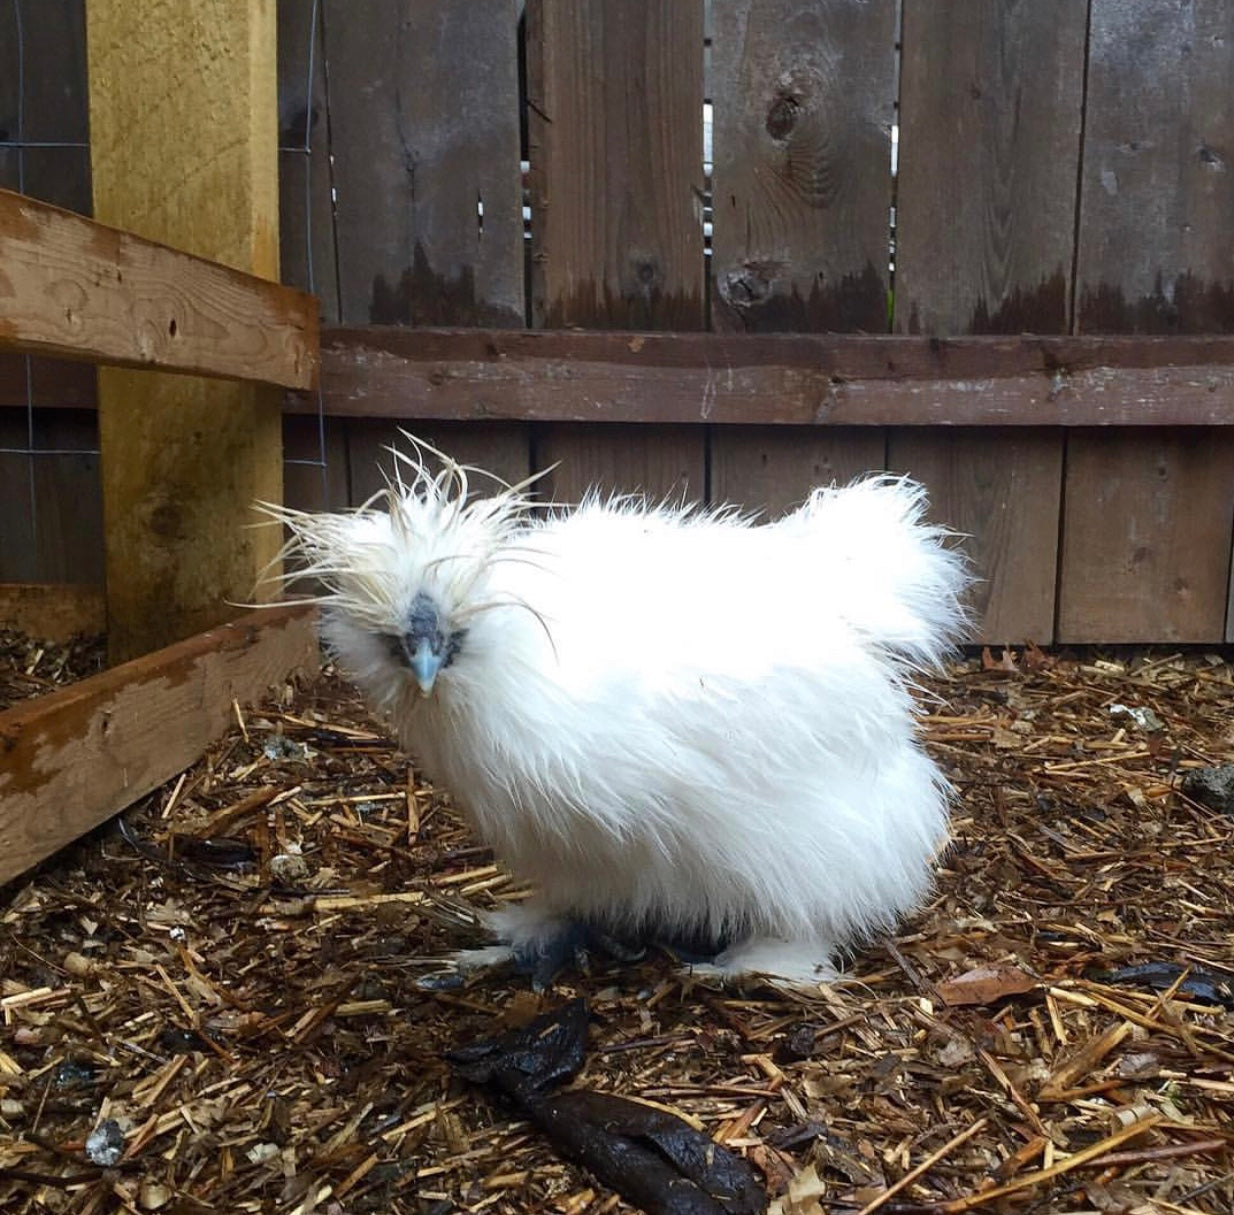 Why chickens don't come in out of the rain